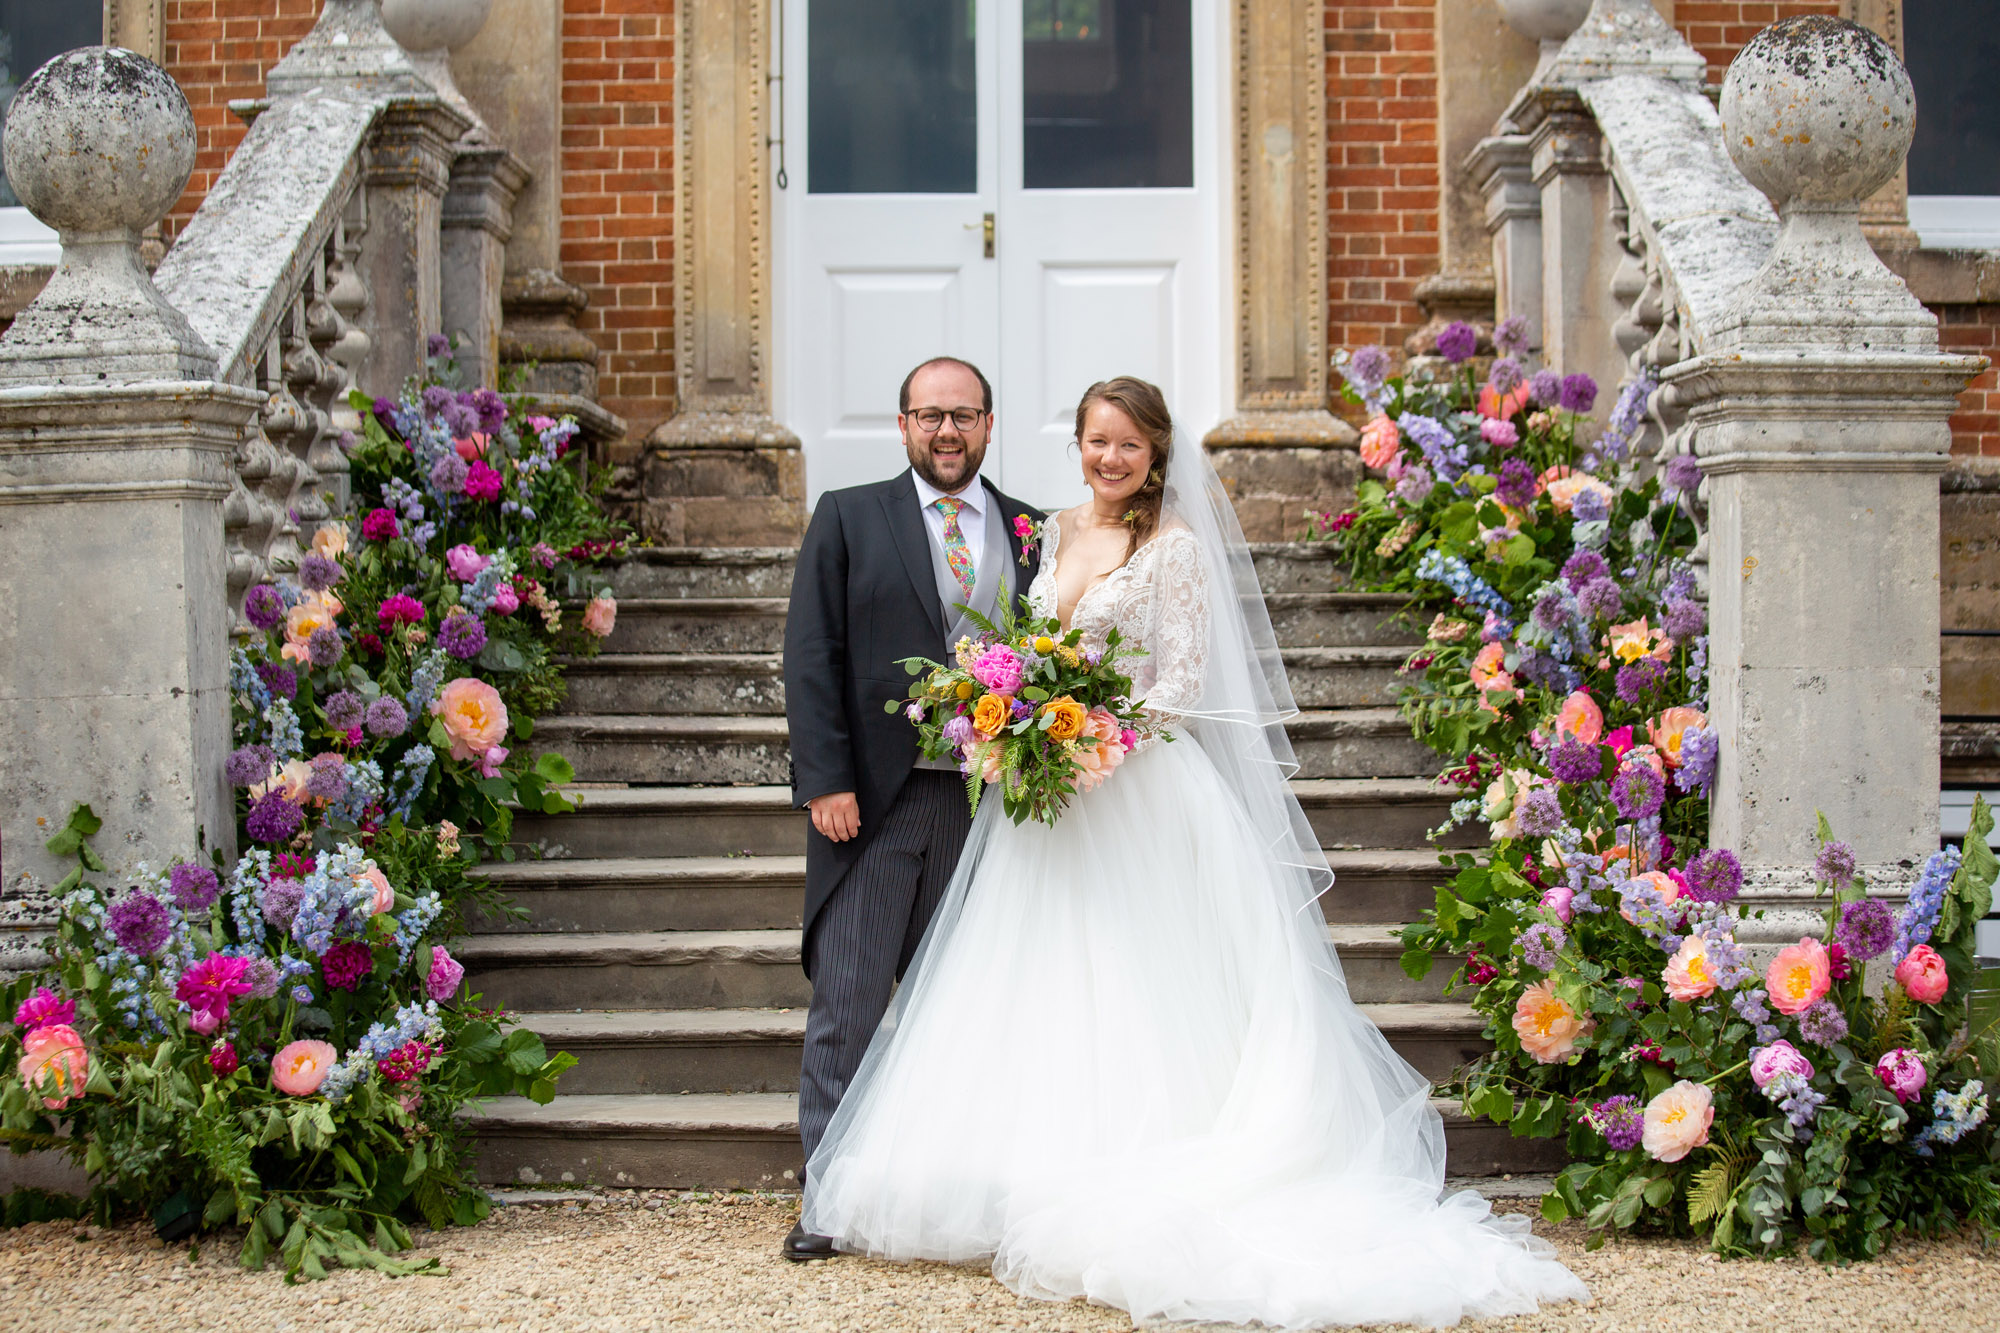 Crowcombe Court steps decorated with summer flowers for a beautiful photo of a groom and bride. Image by Martin Dabek Photography